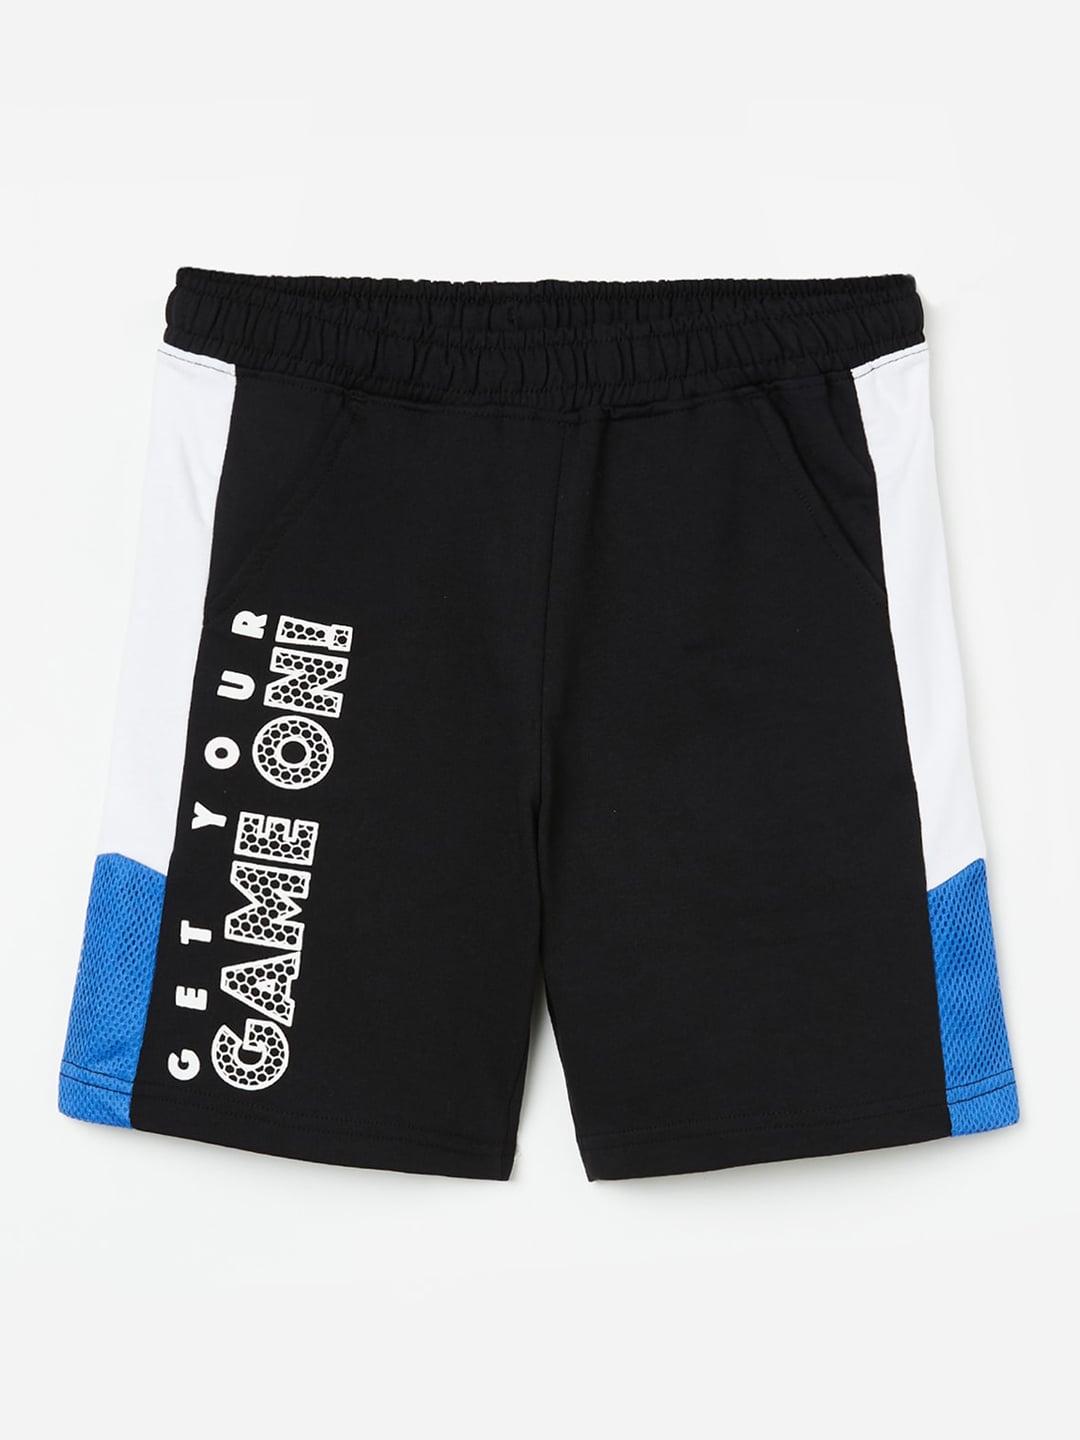 fame-forever-by-lifestyle-boys-pure-cotton-sports-shorts